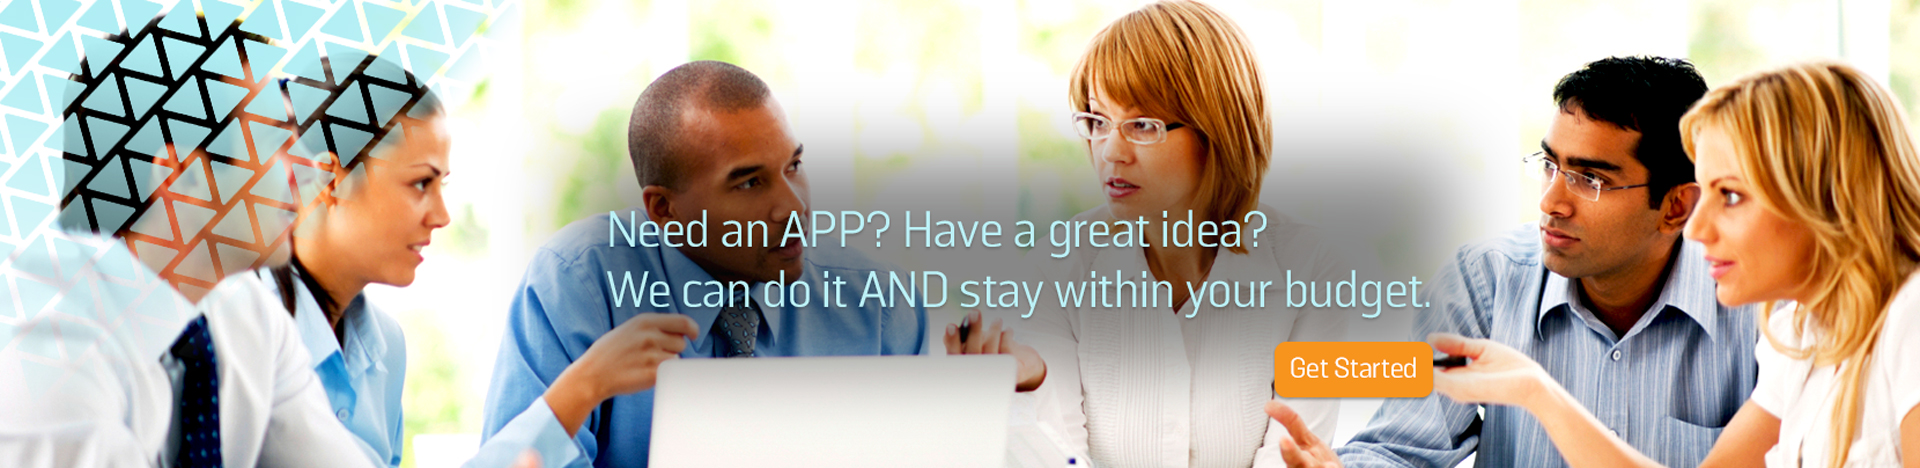 Need an App? Have a great idea? We can do it.